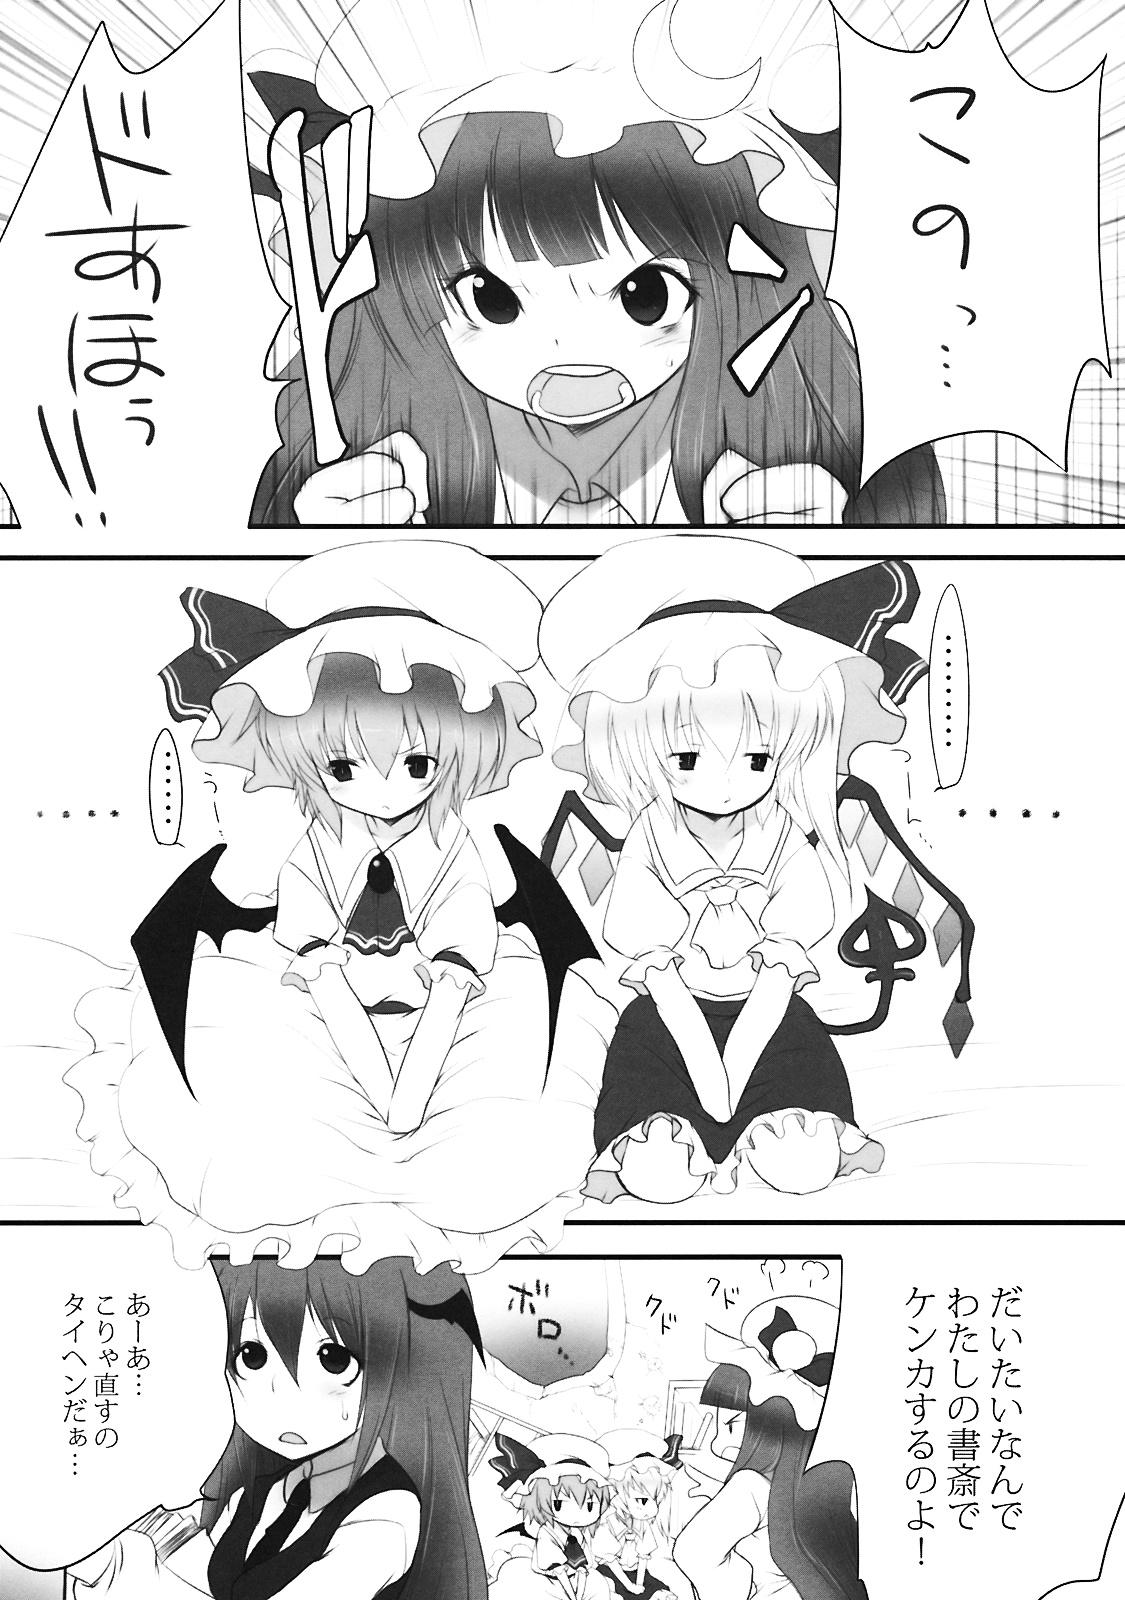 American Pedoria 3 - Touhou project Big breasts - Page 6